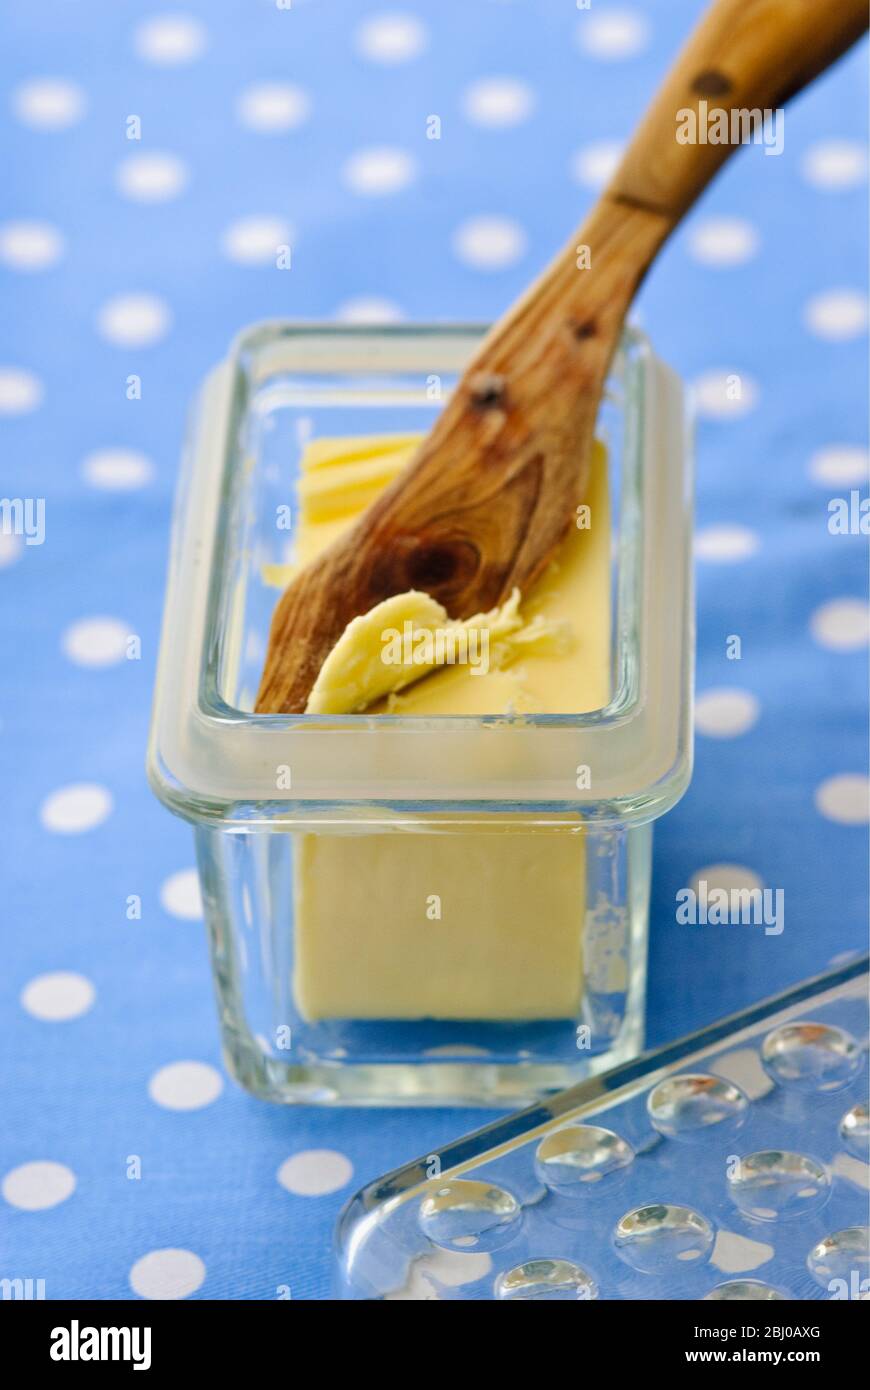 https://c8.alamy.com/comp/2BJ0AXG/glass-butter-dish-of-butter-with-butter-knife-on-blue-and-white-spotted-cloth-2BJ0AXG.jpg